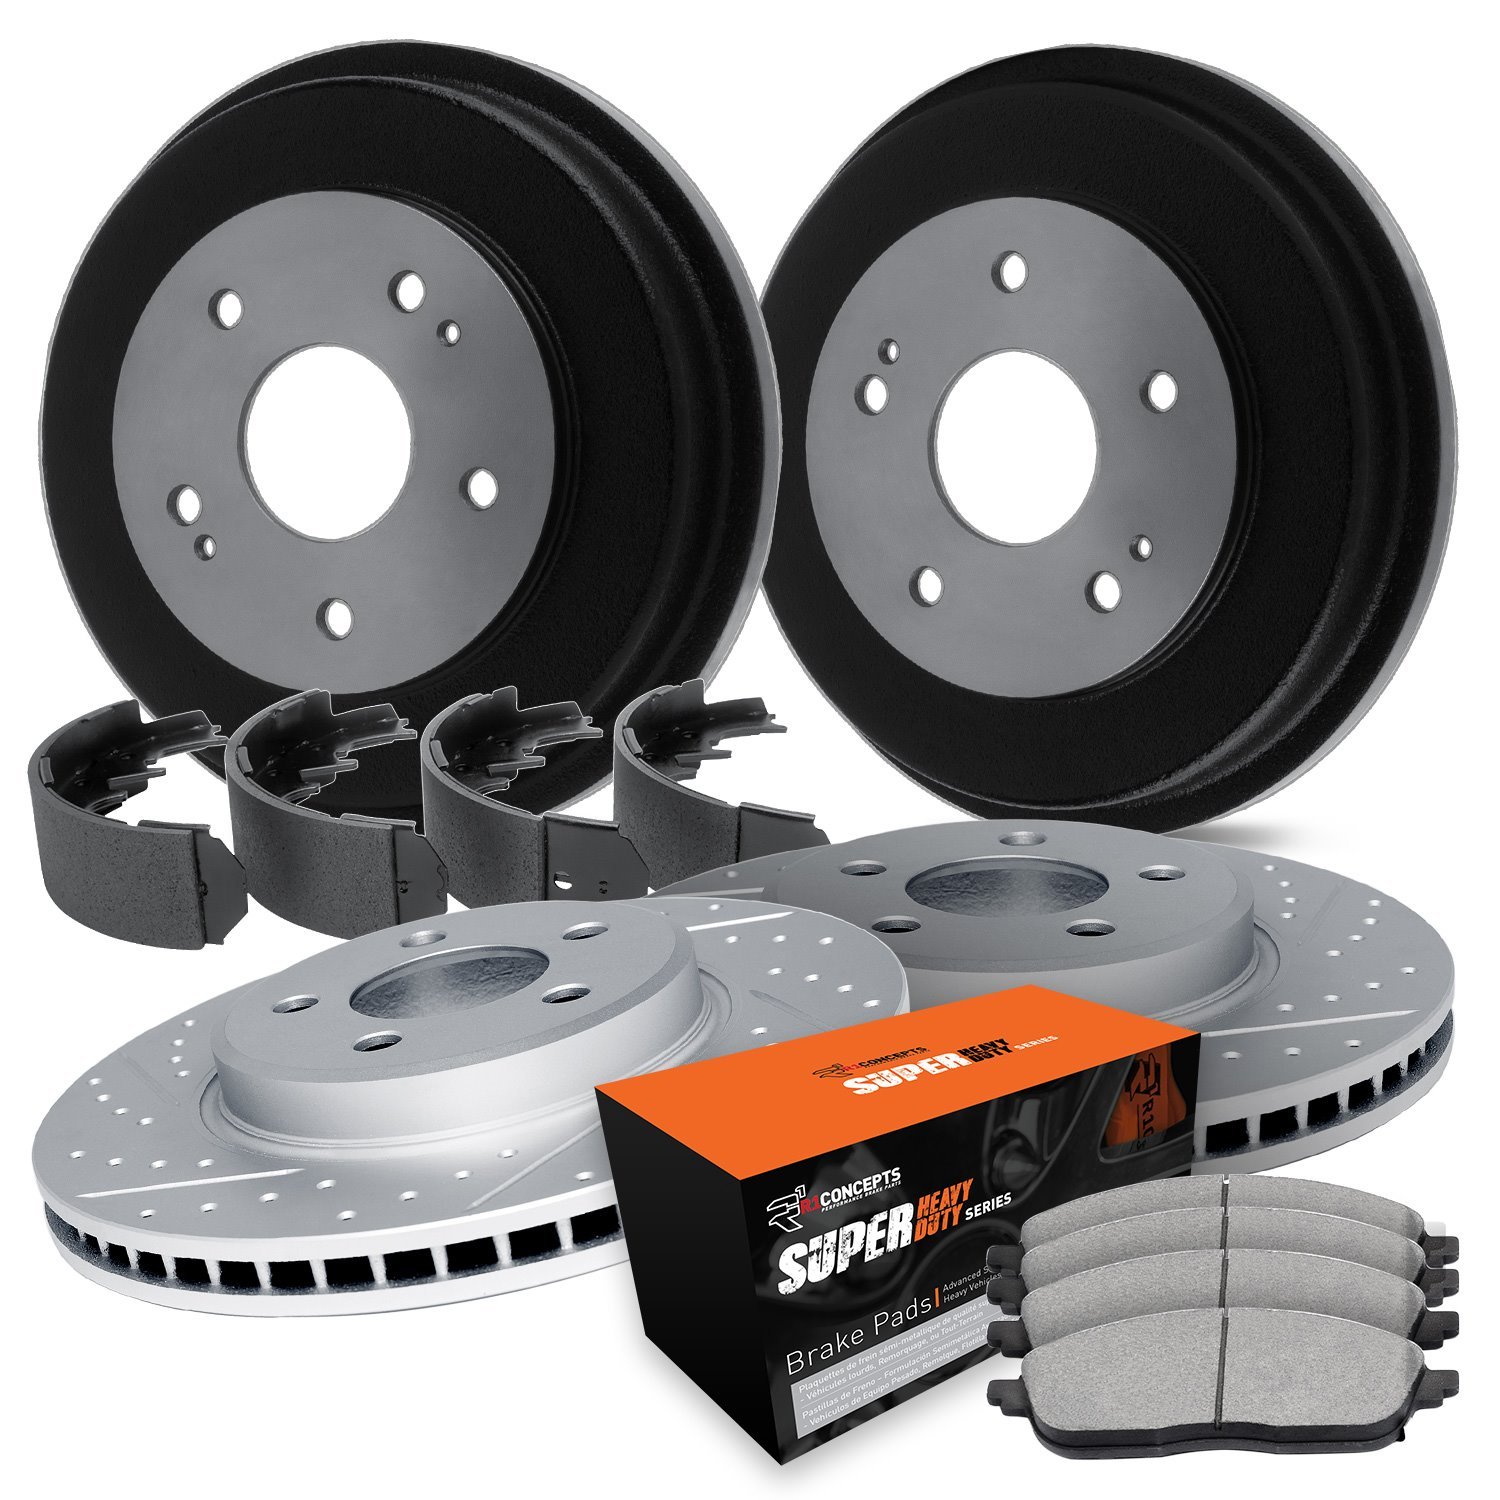 GEO-Carbon Drilled & Slotted Brake Rotor & Drum Set w/Super-Duty Pads & Shoes, 2003-2004 Ford/Lincoln/Mercury/Mazda